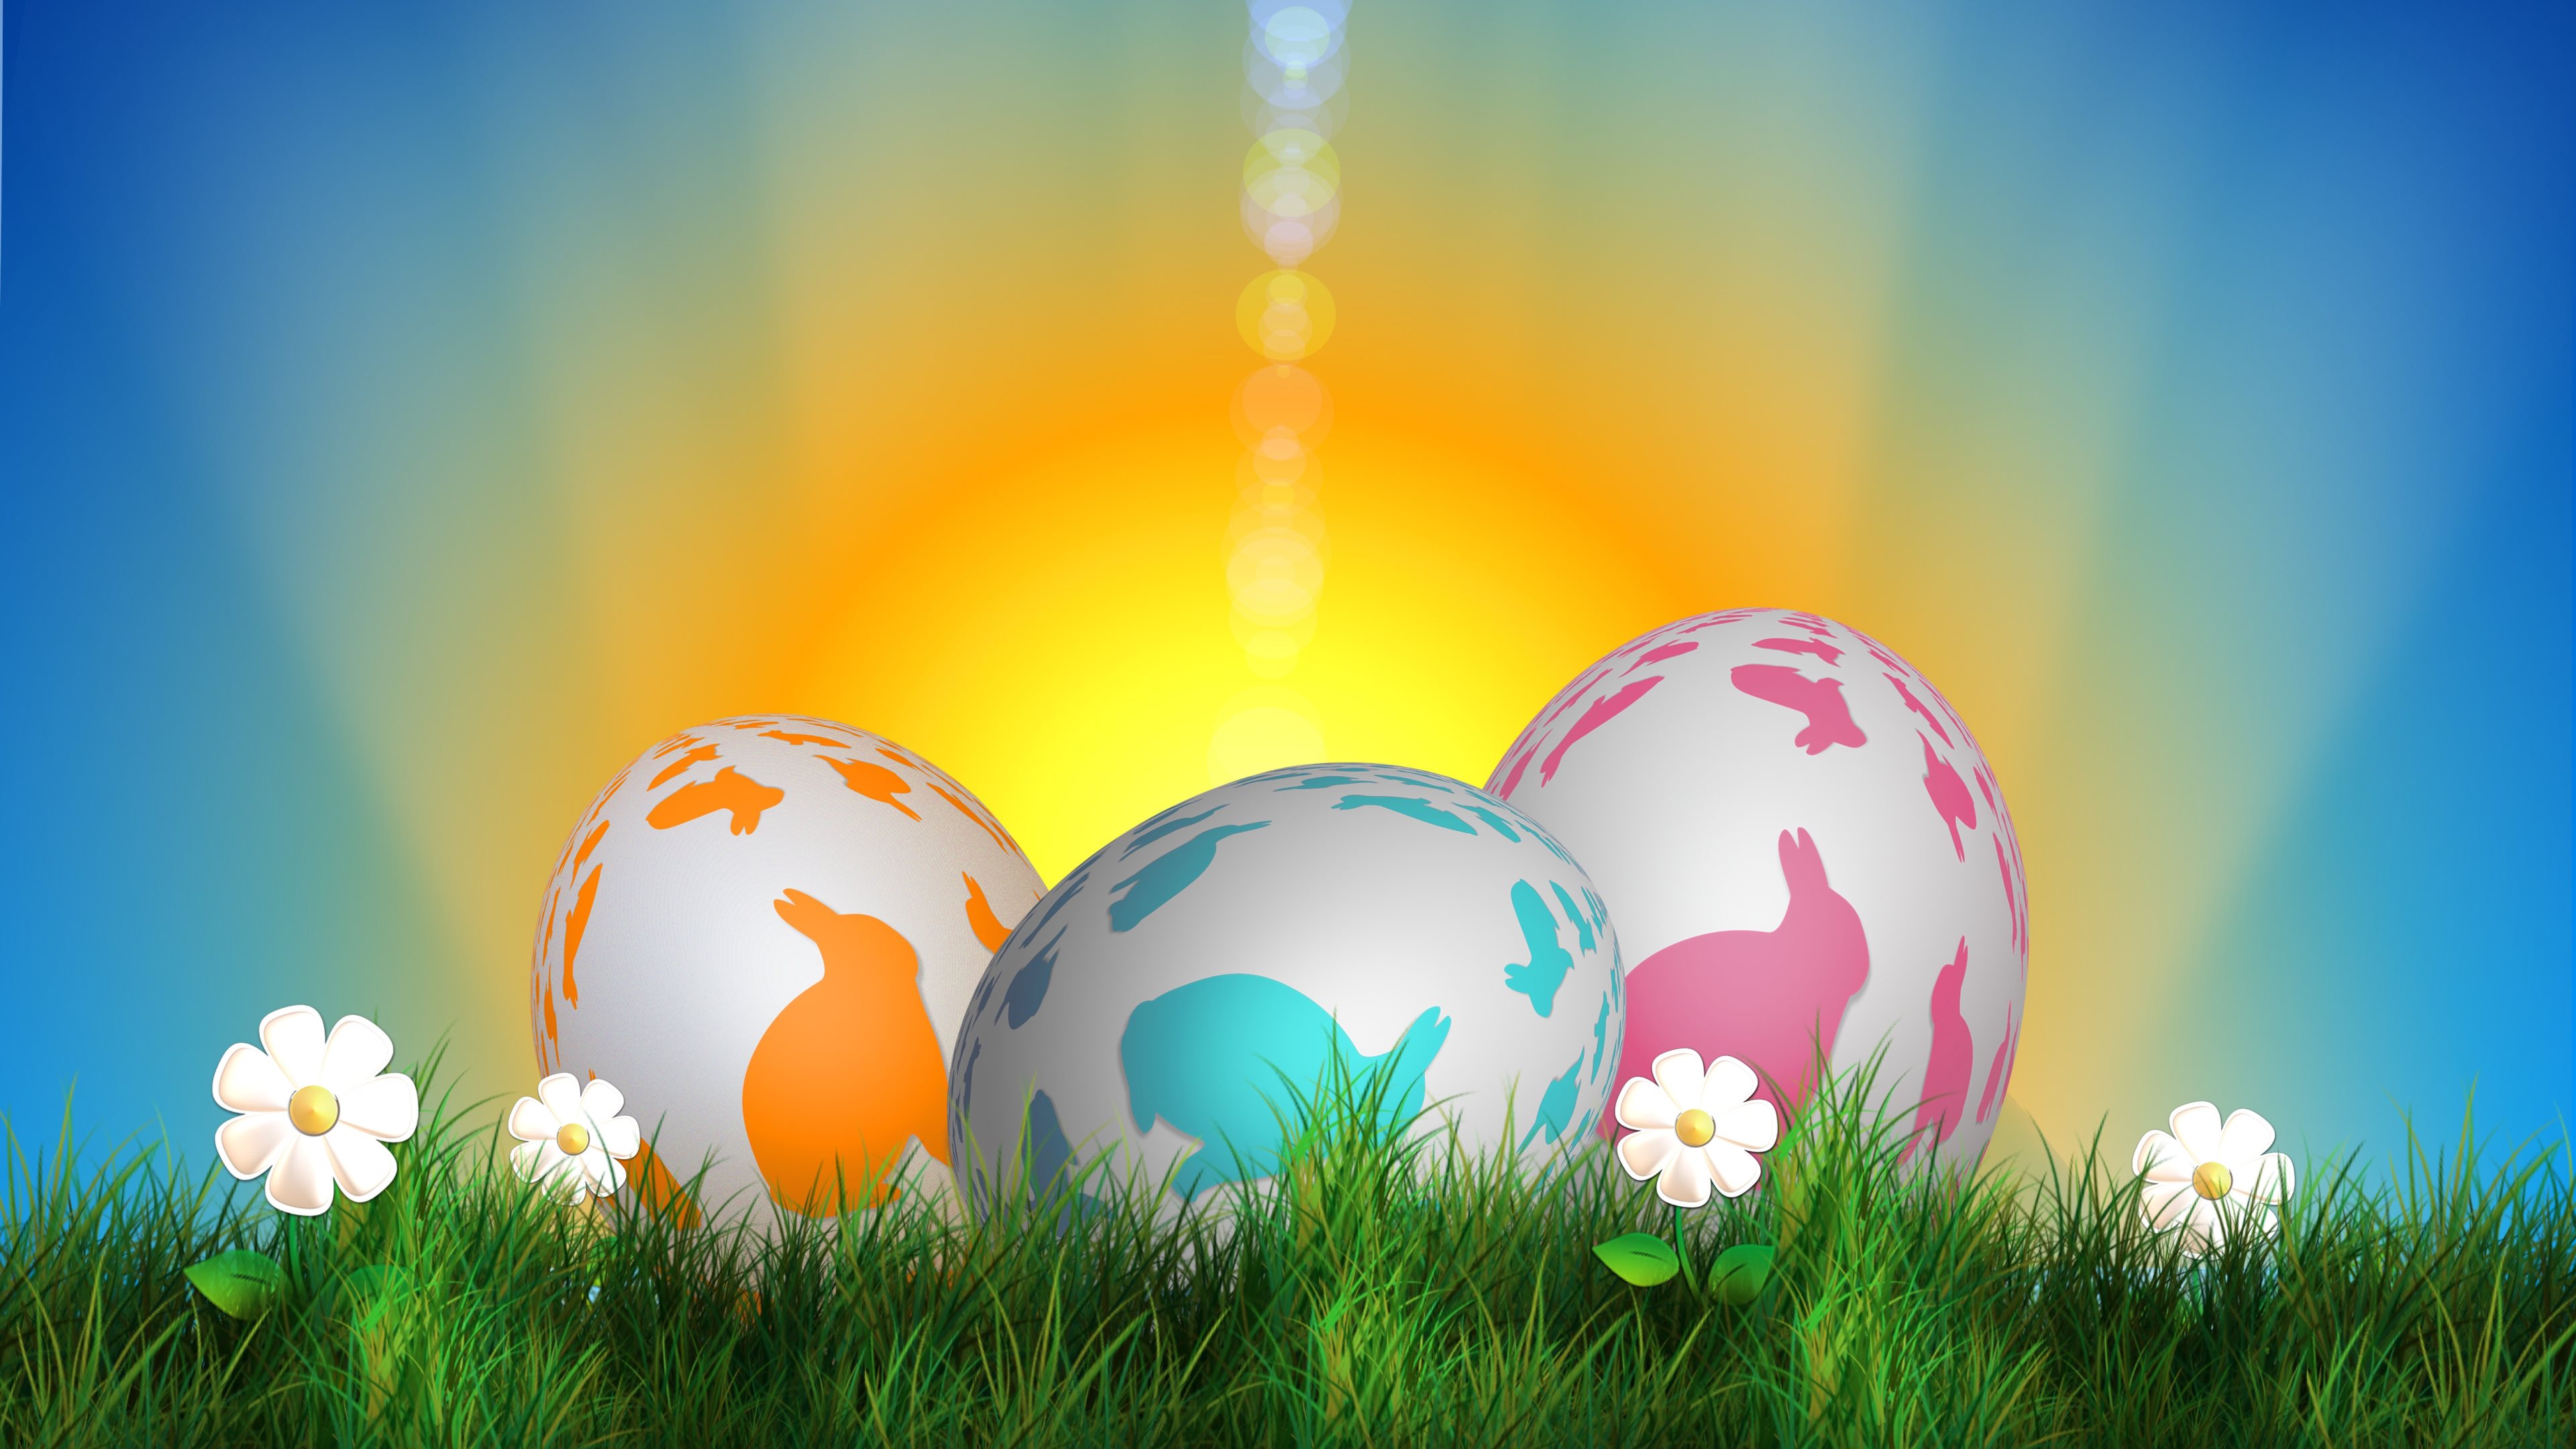 Glitter Happy Easter Family And Friends 2019 - HD Wallpaper 